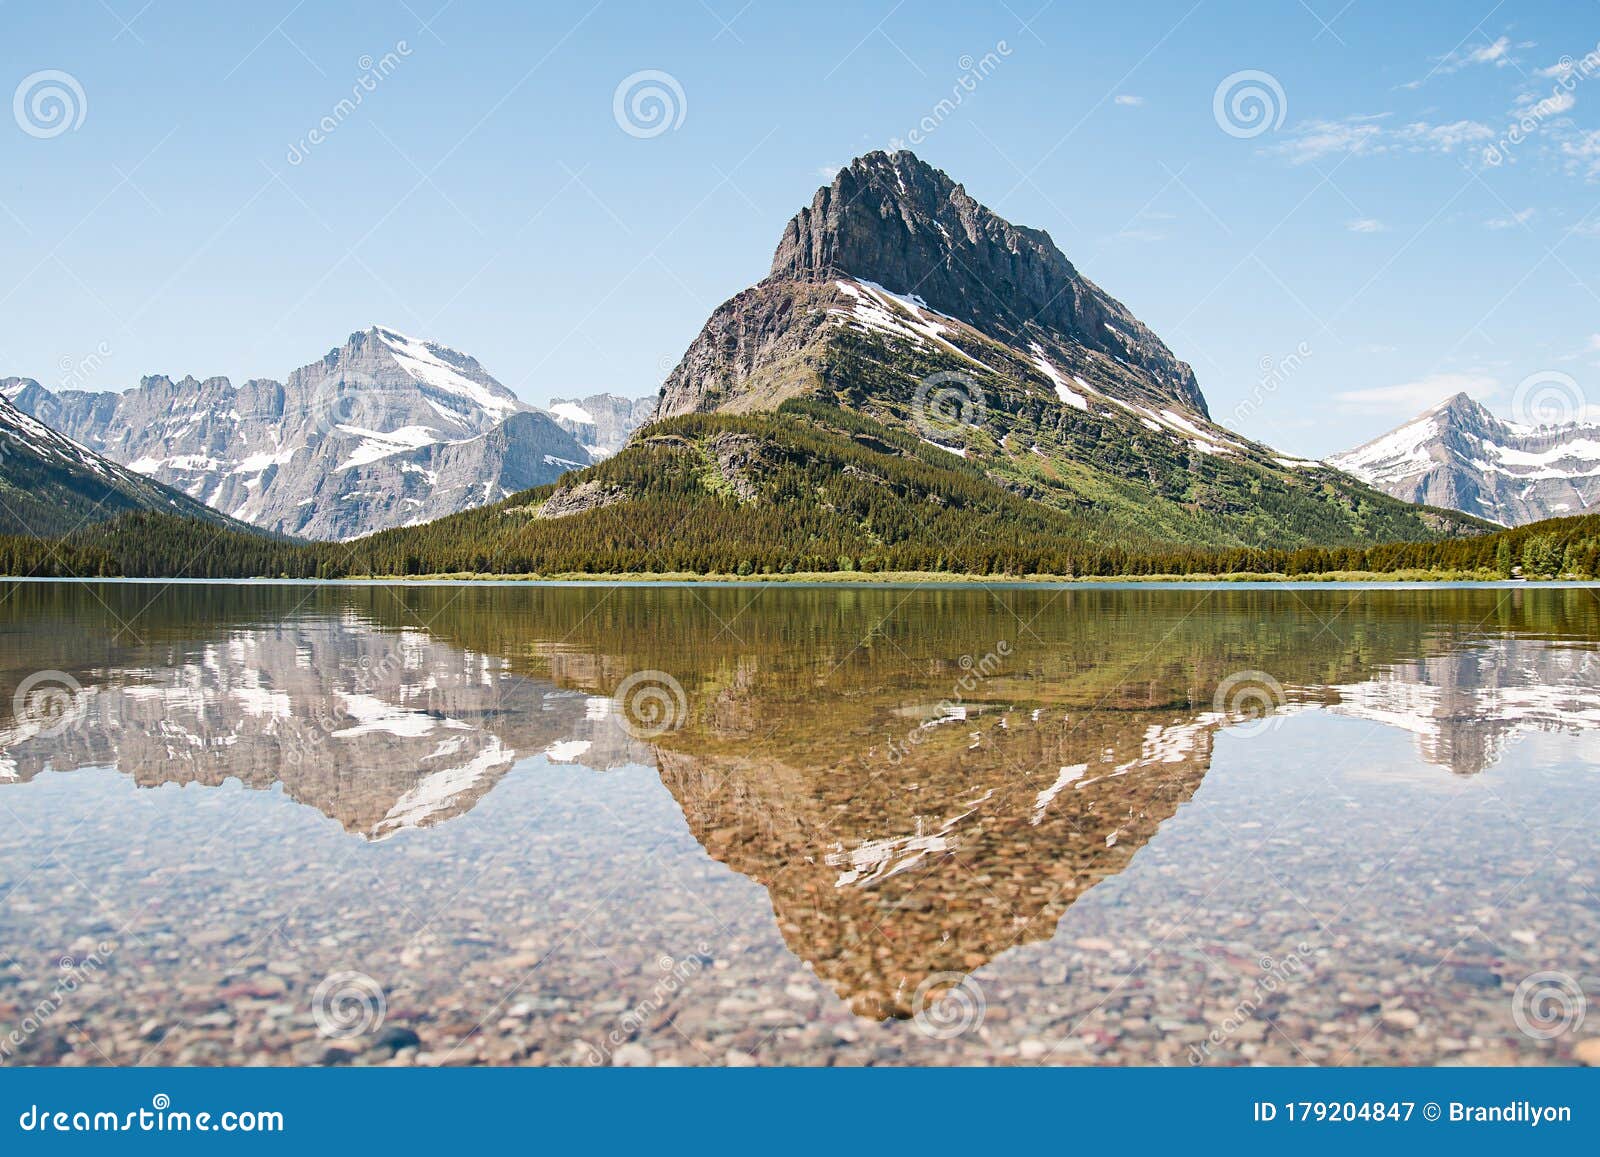 a snowy mountain water reflection on swiftcurrent lake in many glacier region of glacier national park, montana. grinnell point, a